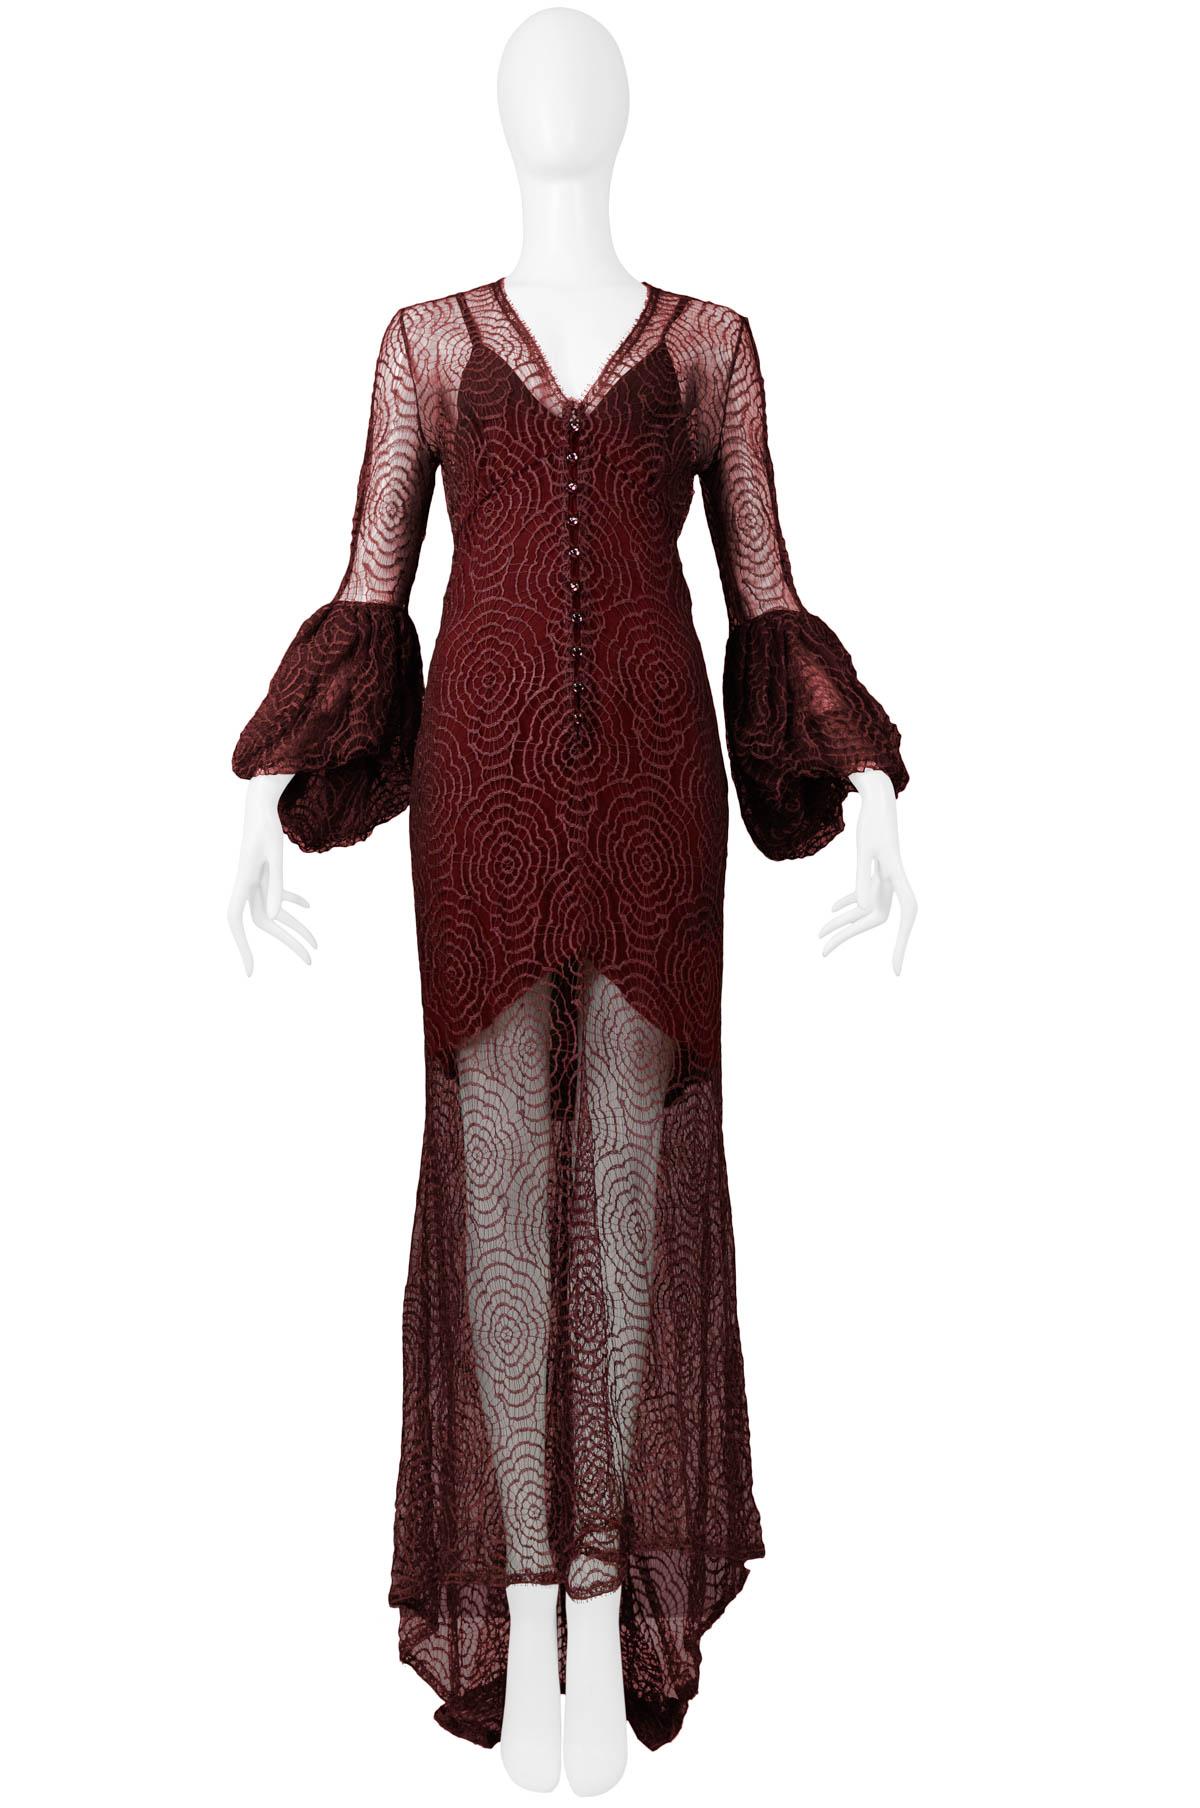 Vintage Karl Lagerfeld for Chloé burgundy abstract floral lace gown featuring, flounce sleeves, button front detail, slip underlay and an asymmetrical hem. From the 1994 Collection.

Chole, Paris
Designed By Karl Lagerfeld
Size Small
Measurements: